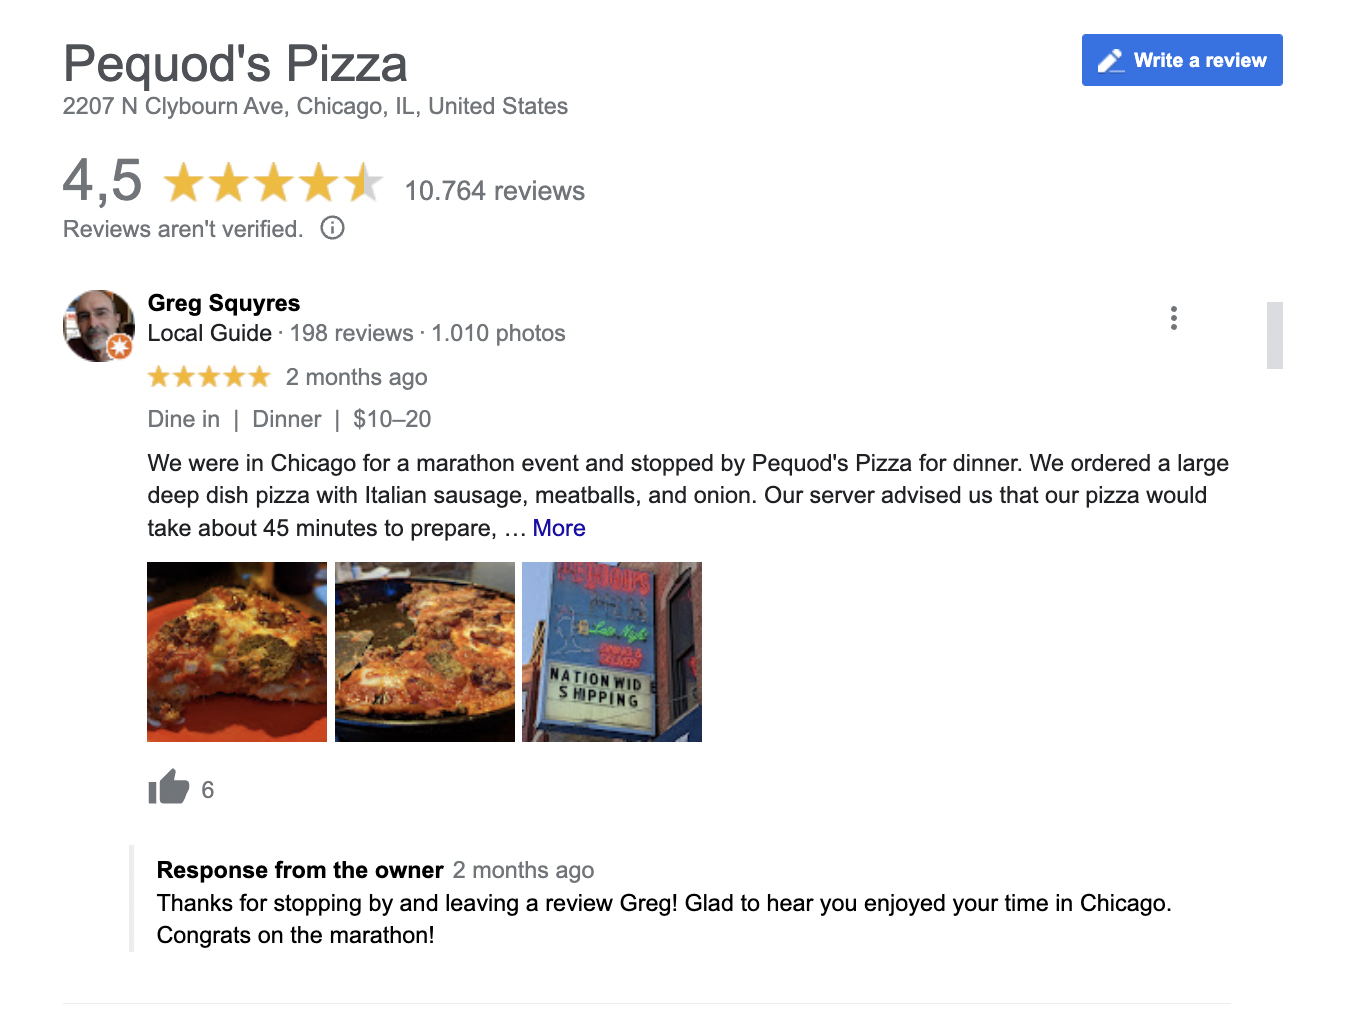 pizza reviews on google, demand generation strategy